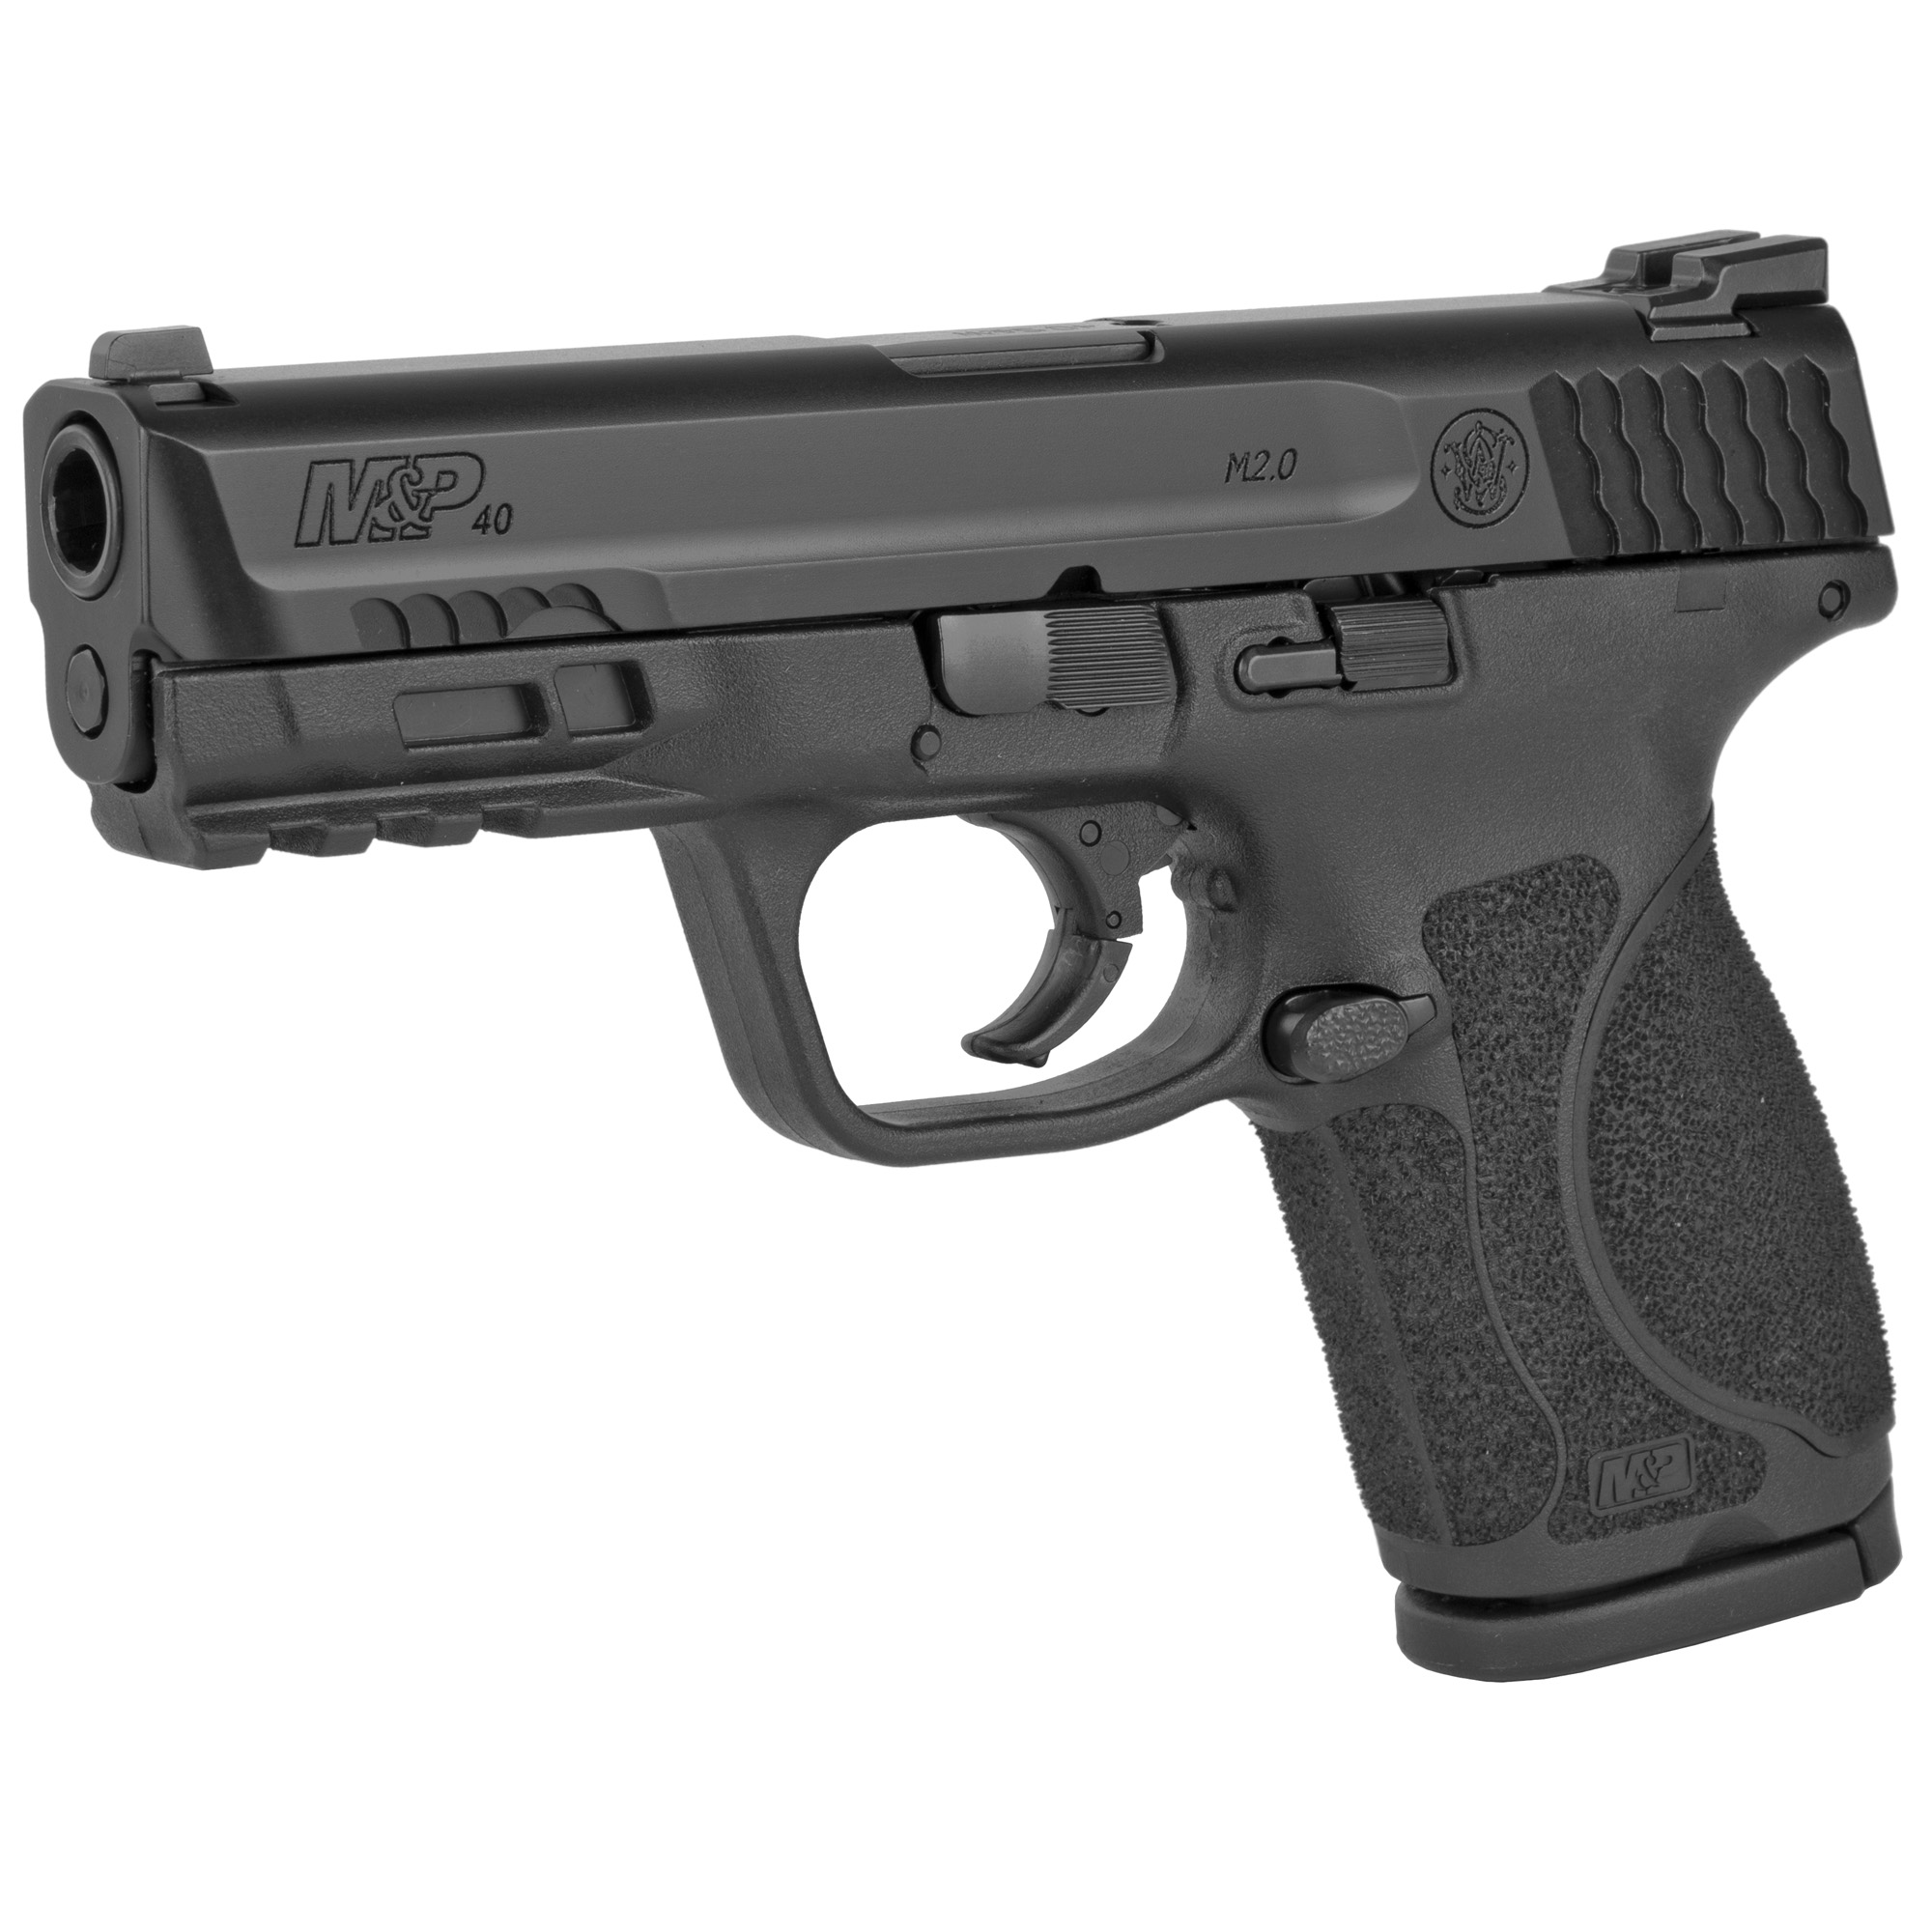 Smith & Wesson, M&P 2.0, Striker Fired, Semi-automatic, Polymer Frame Pistol, Compact, 40 S&W, 4" Barrel, Armornite Finish, Black, Fixed Sights, Manual Thumb Safety, 13 Rounds, 2 Magazines